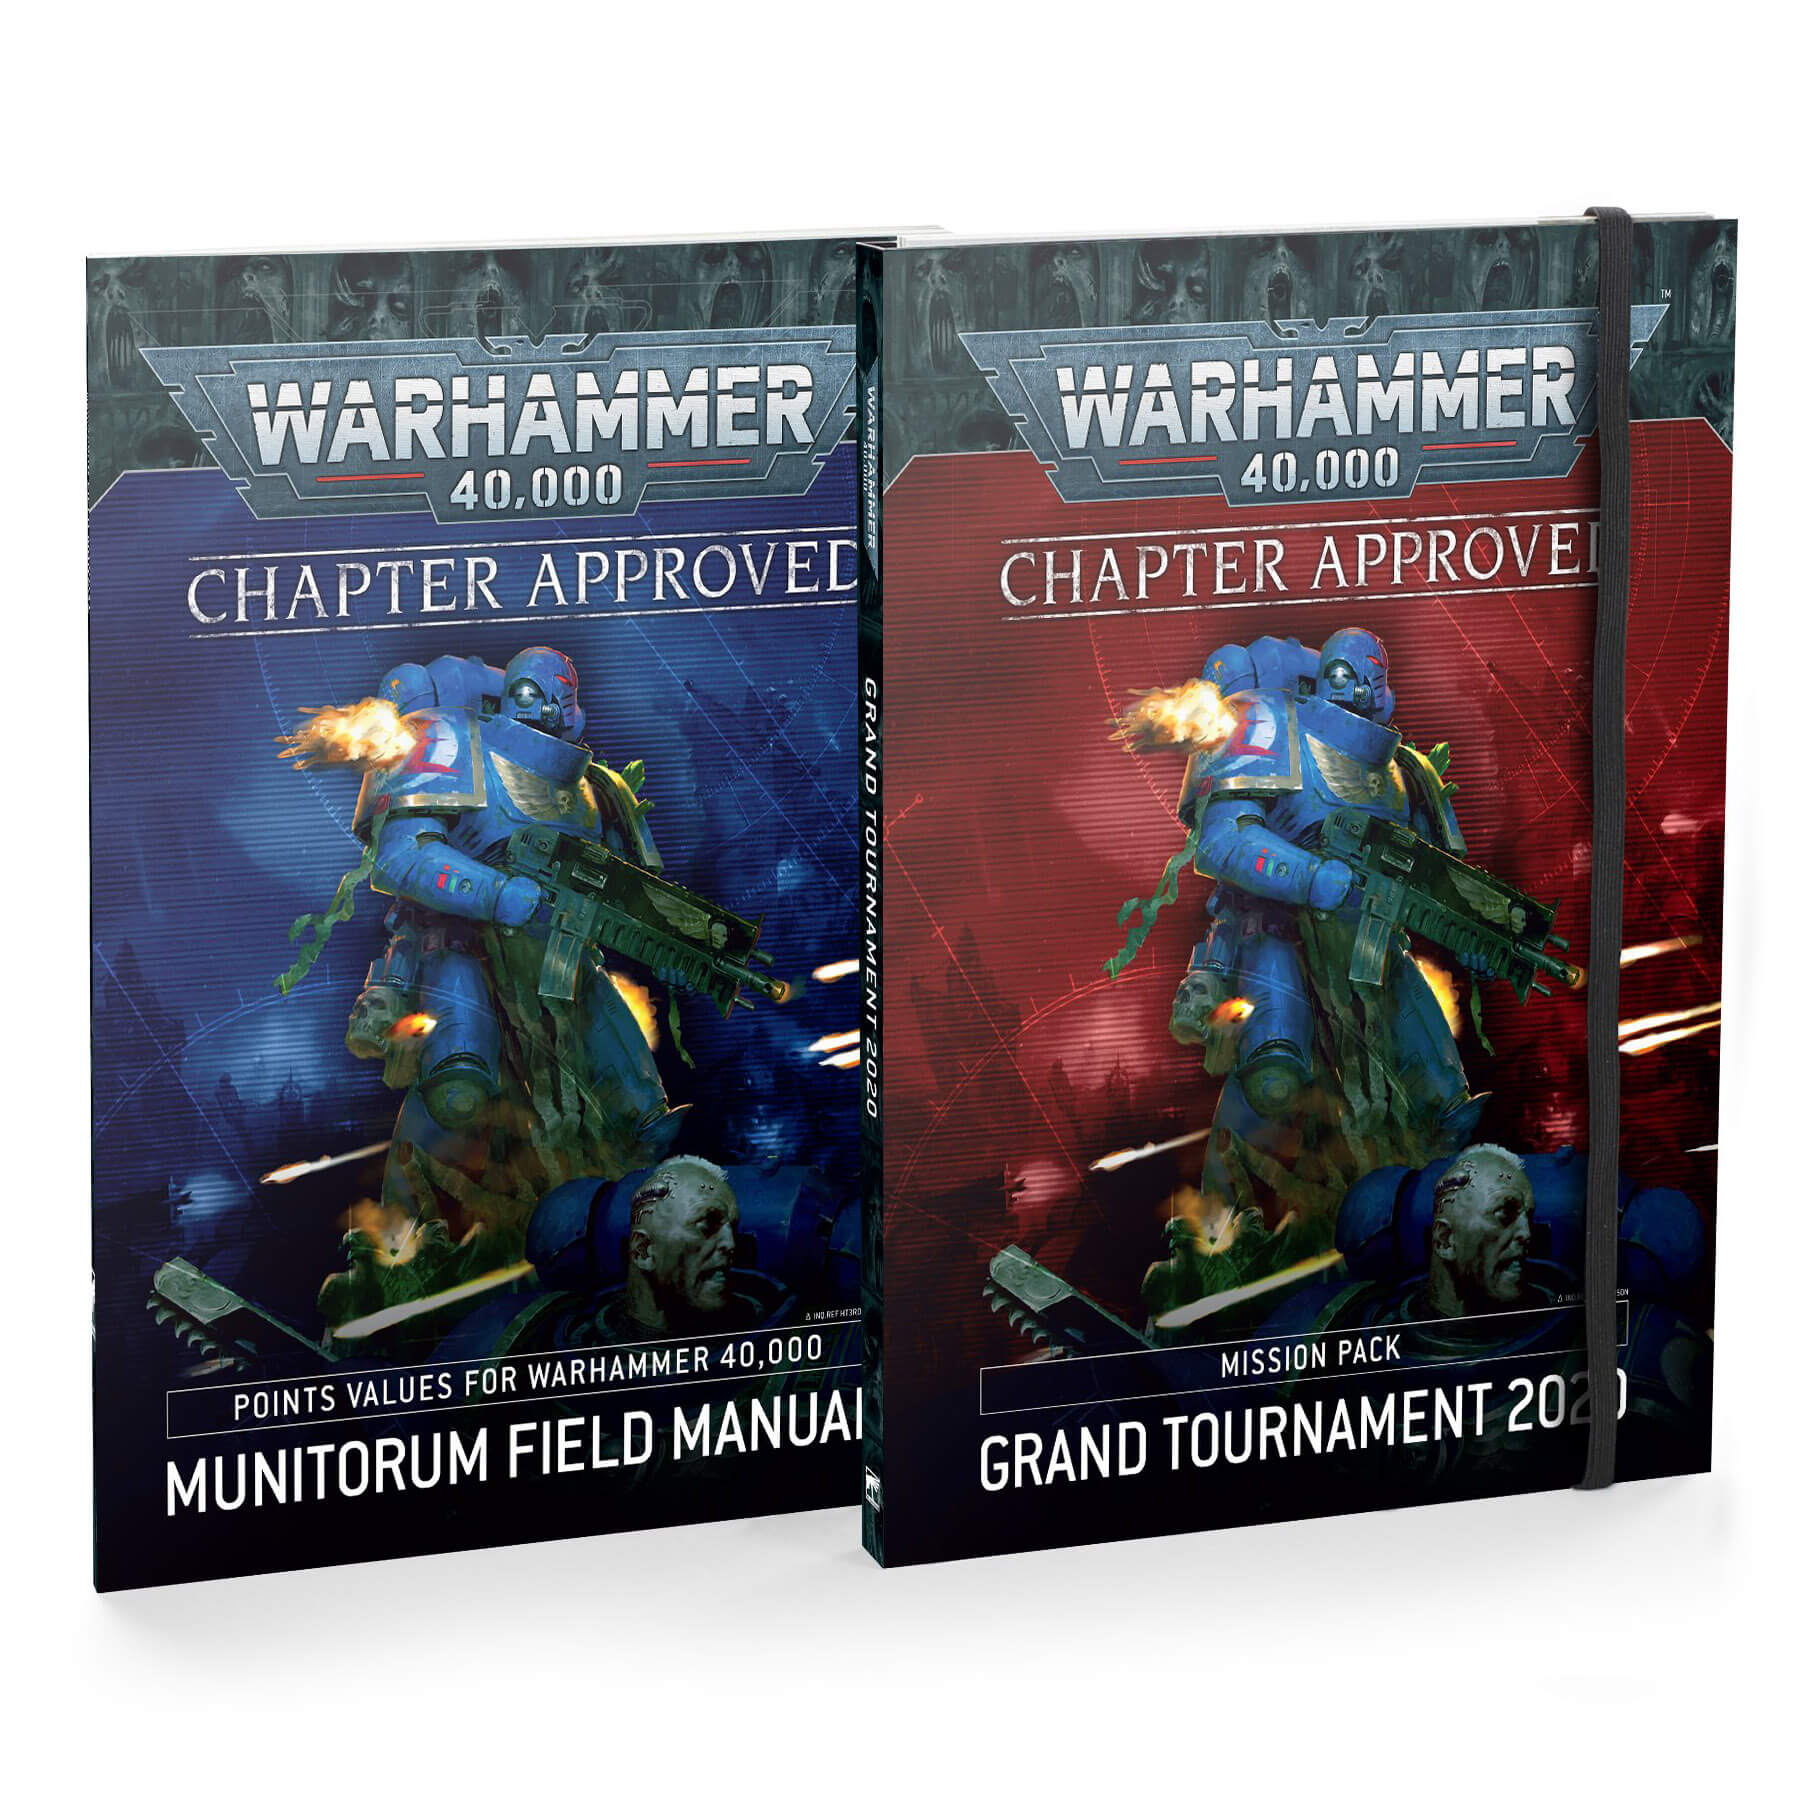 Warhammer 40k Chapter Approved Grand Tournament 2020 Mission Pack and Munitorum Field Manual